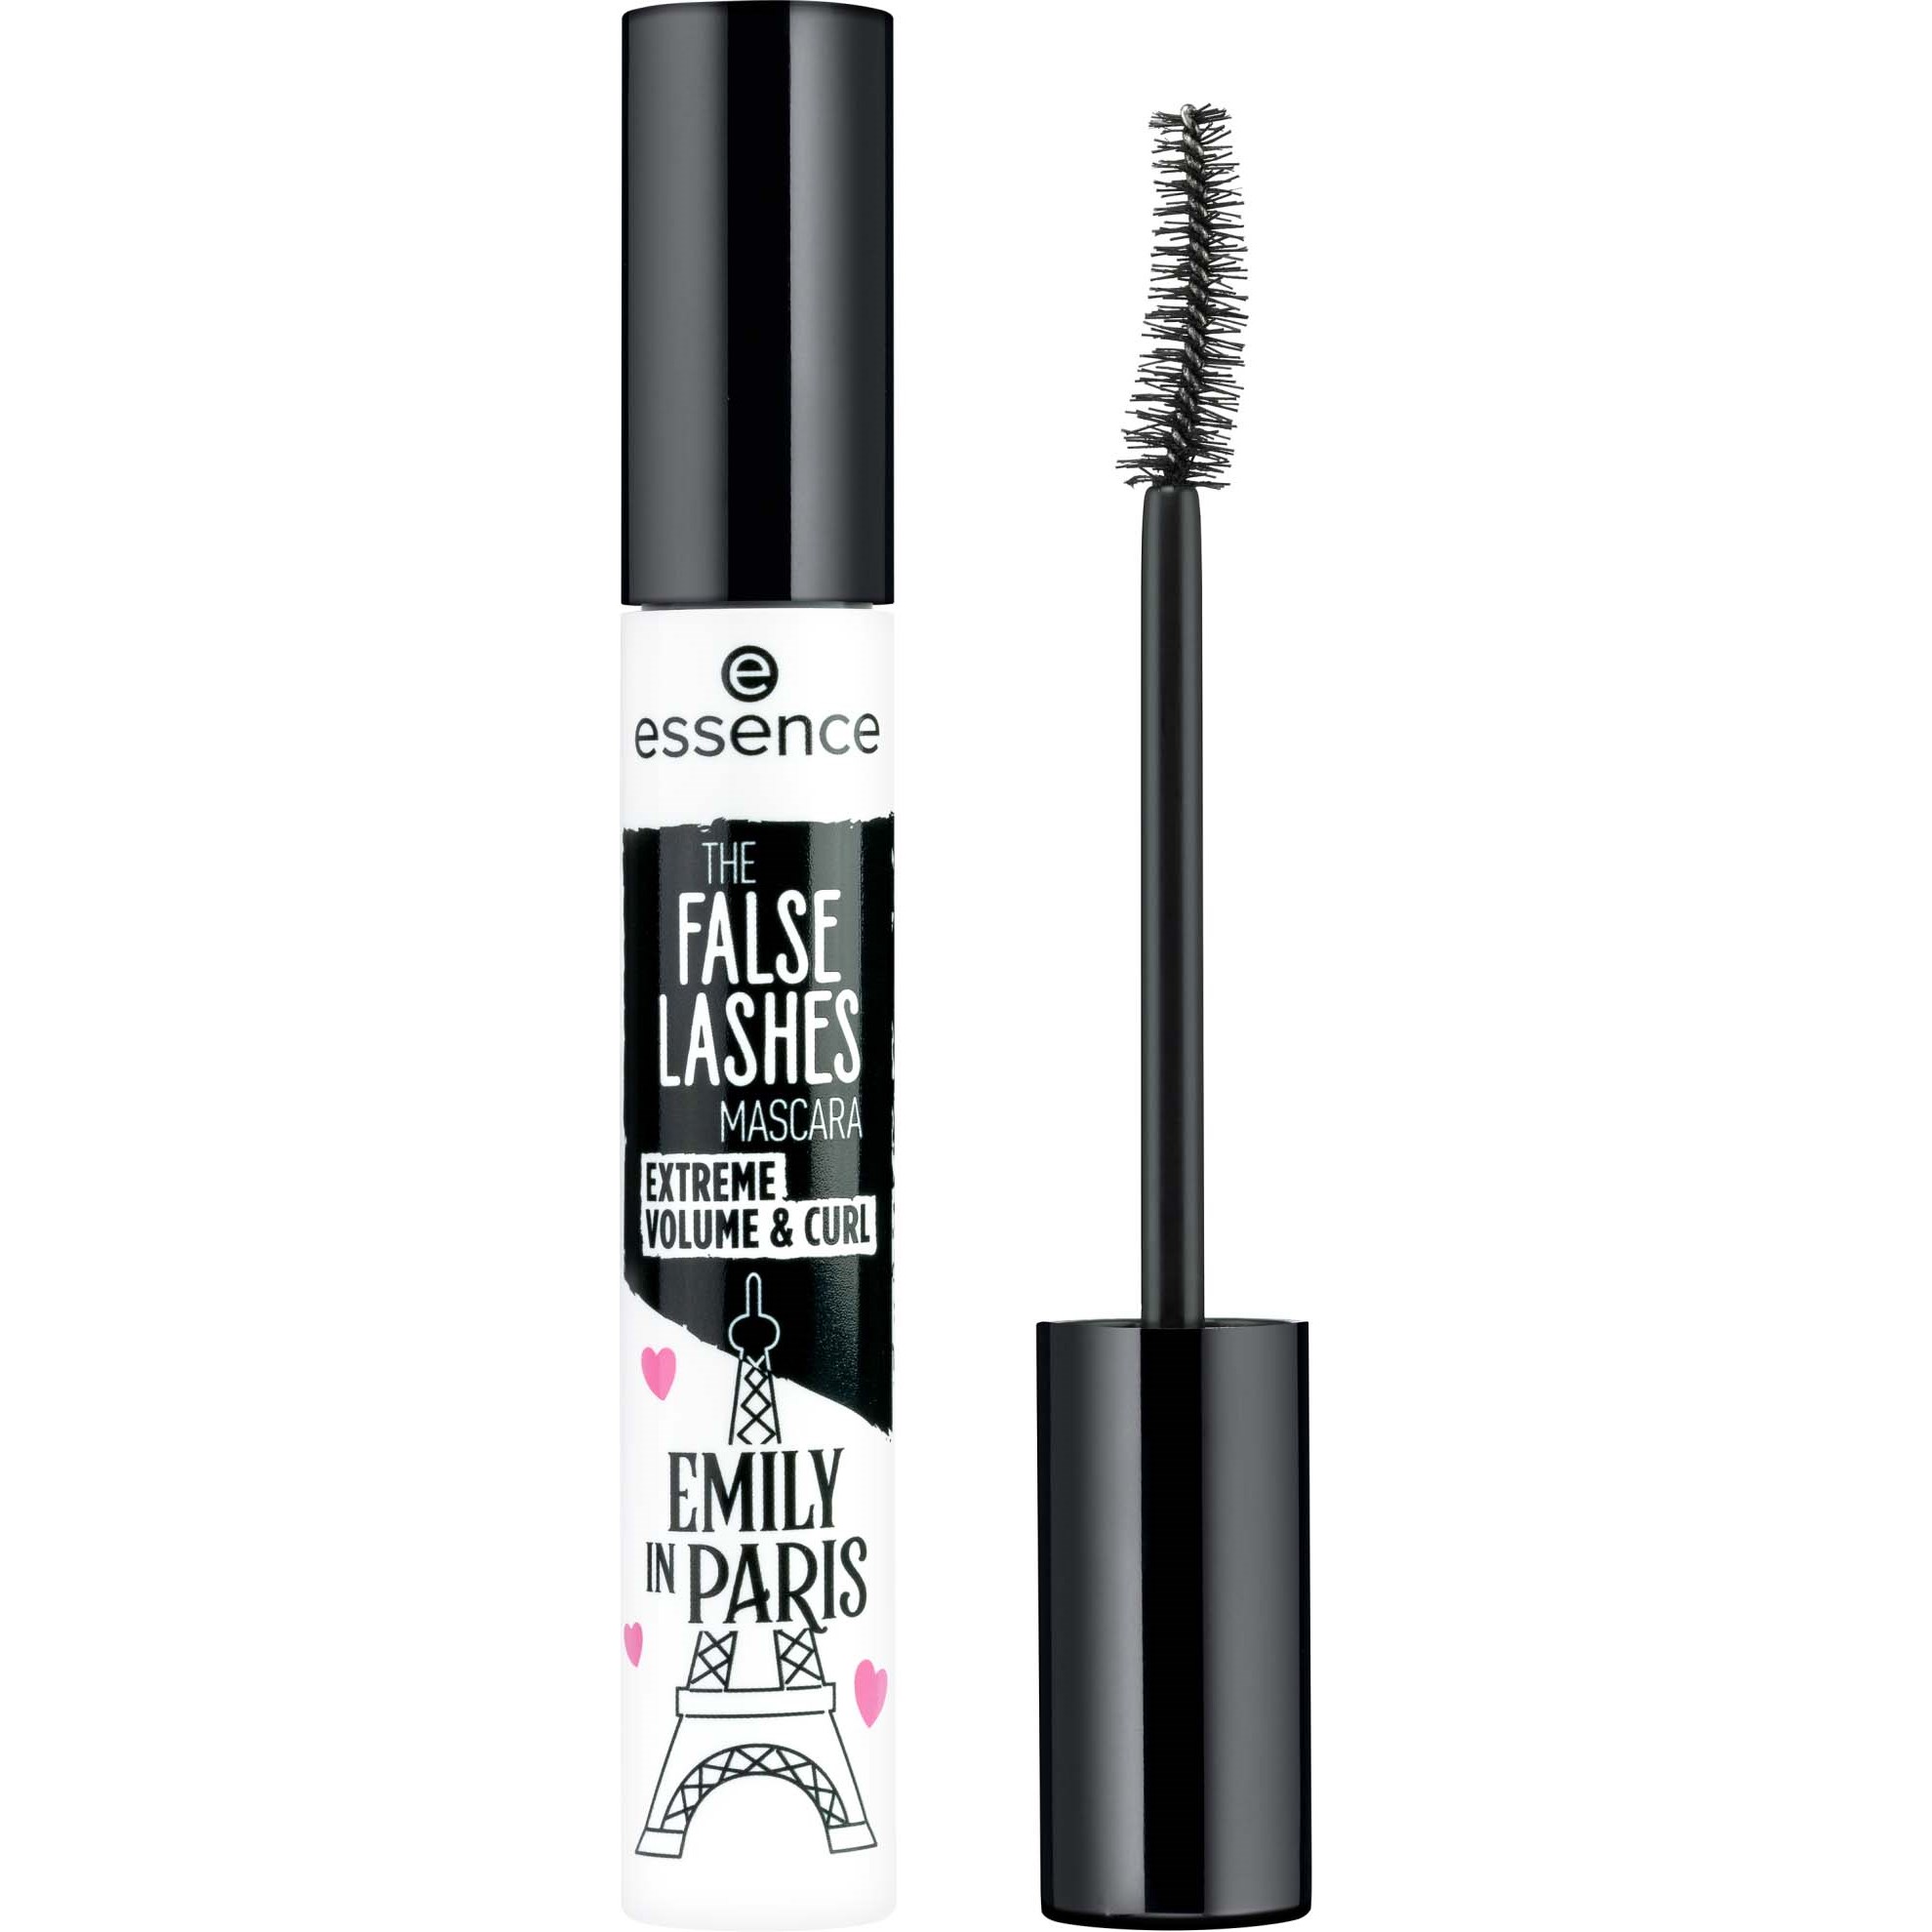 essence Emily In Paris By essence The False Lashes Mascara Extreme Vol